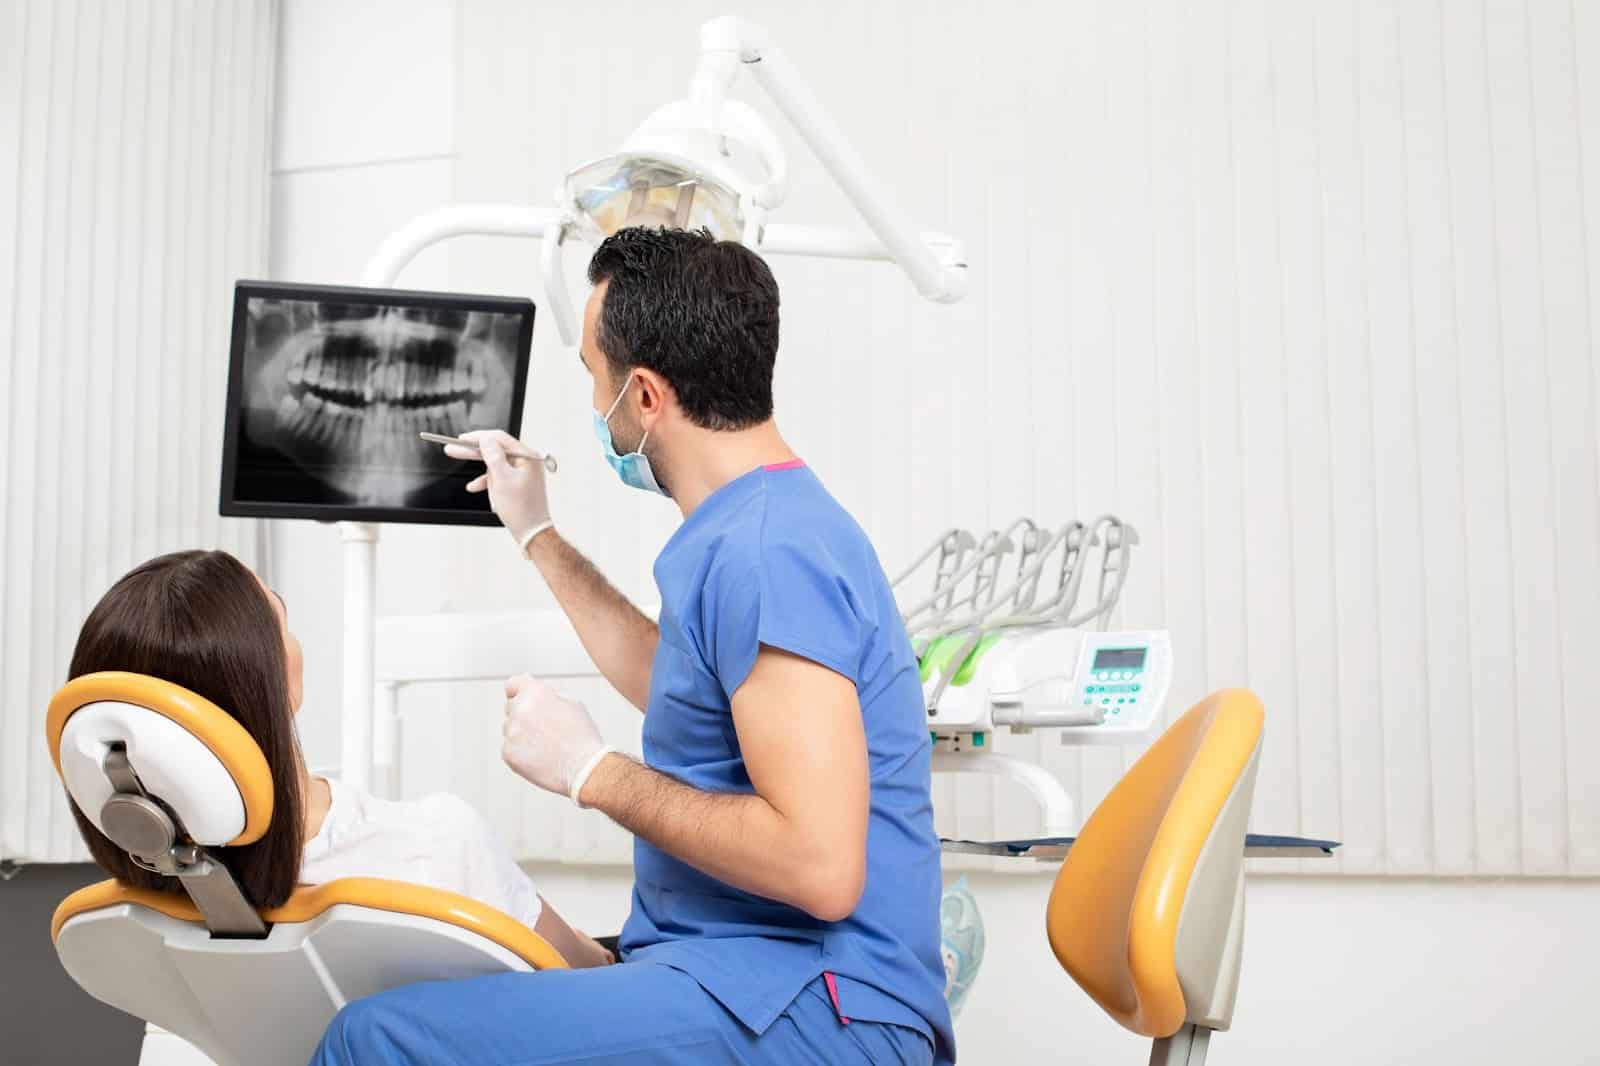 Have you ever wondered why orthodontists use X-rays? Well, our Buttram Orthodontics team is happy to cover why we use X-rays!